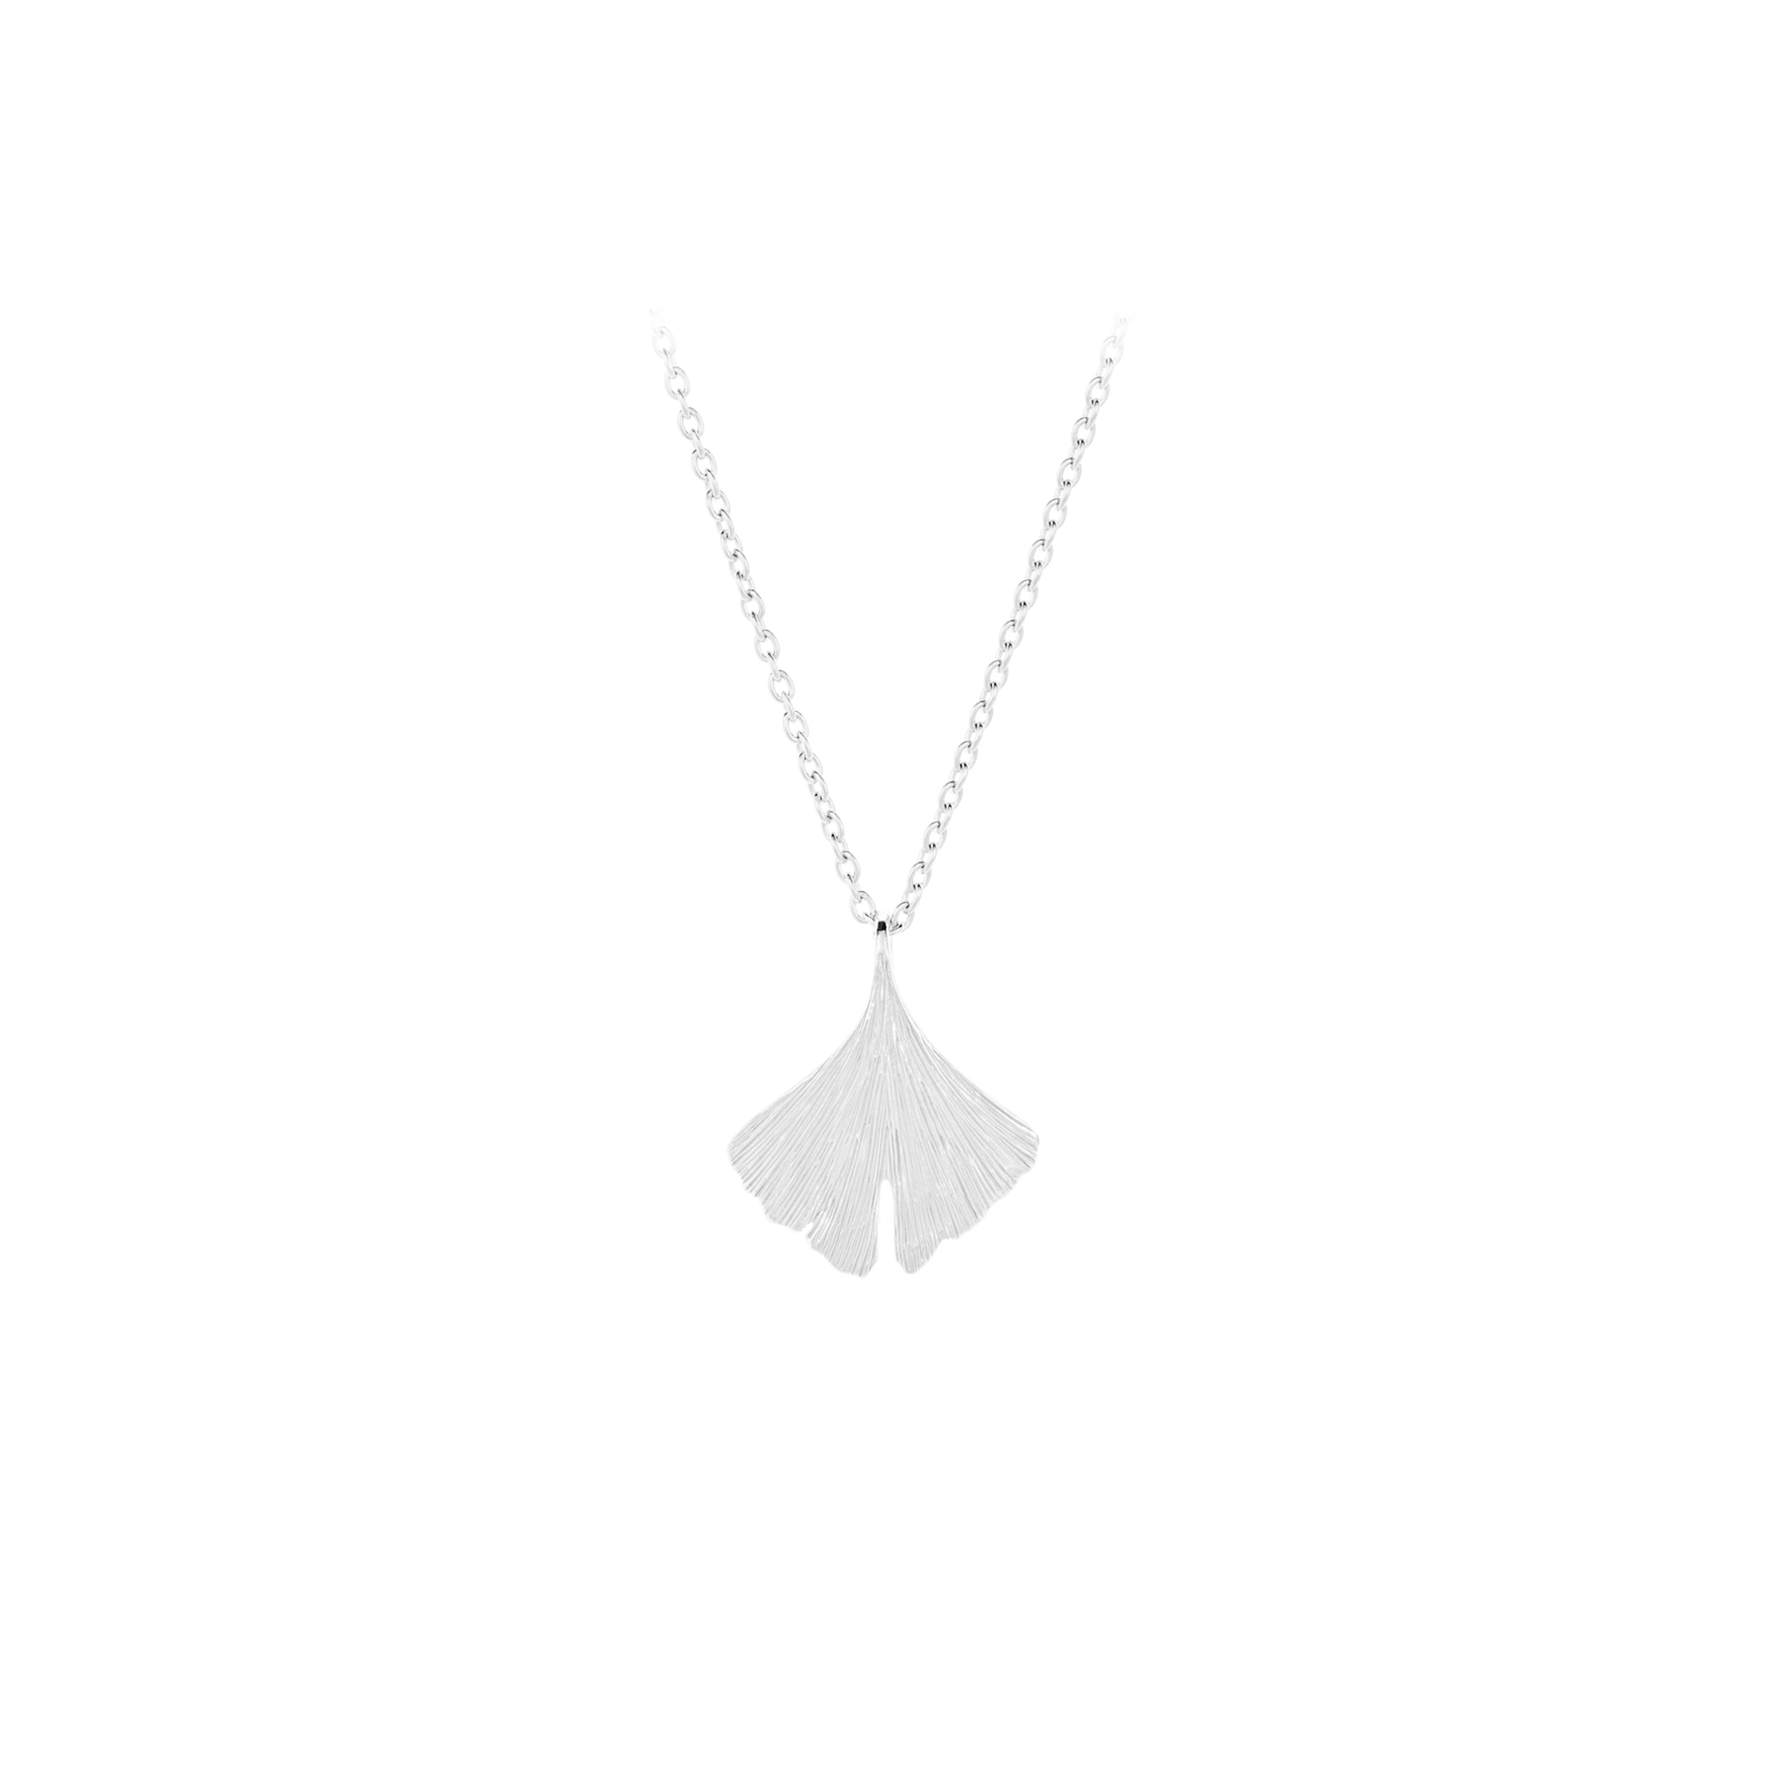 Biloba Necklace from Pernille Corydon in Silver Sterling 925